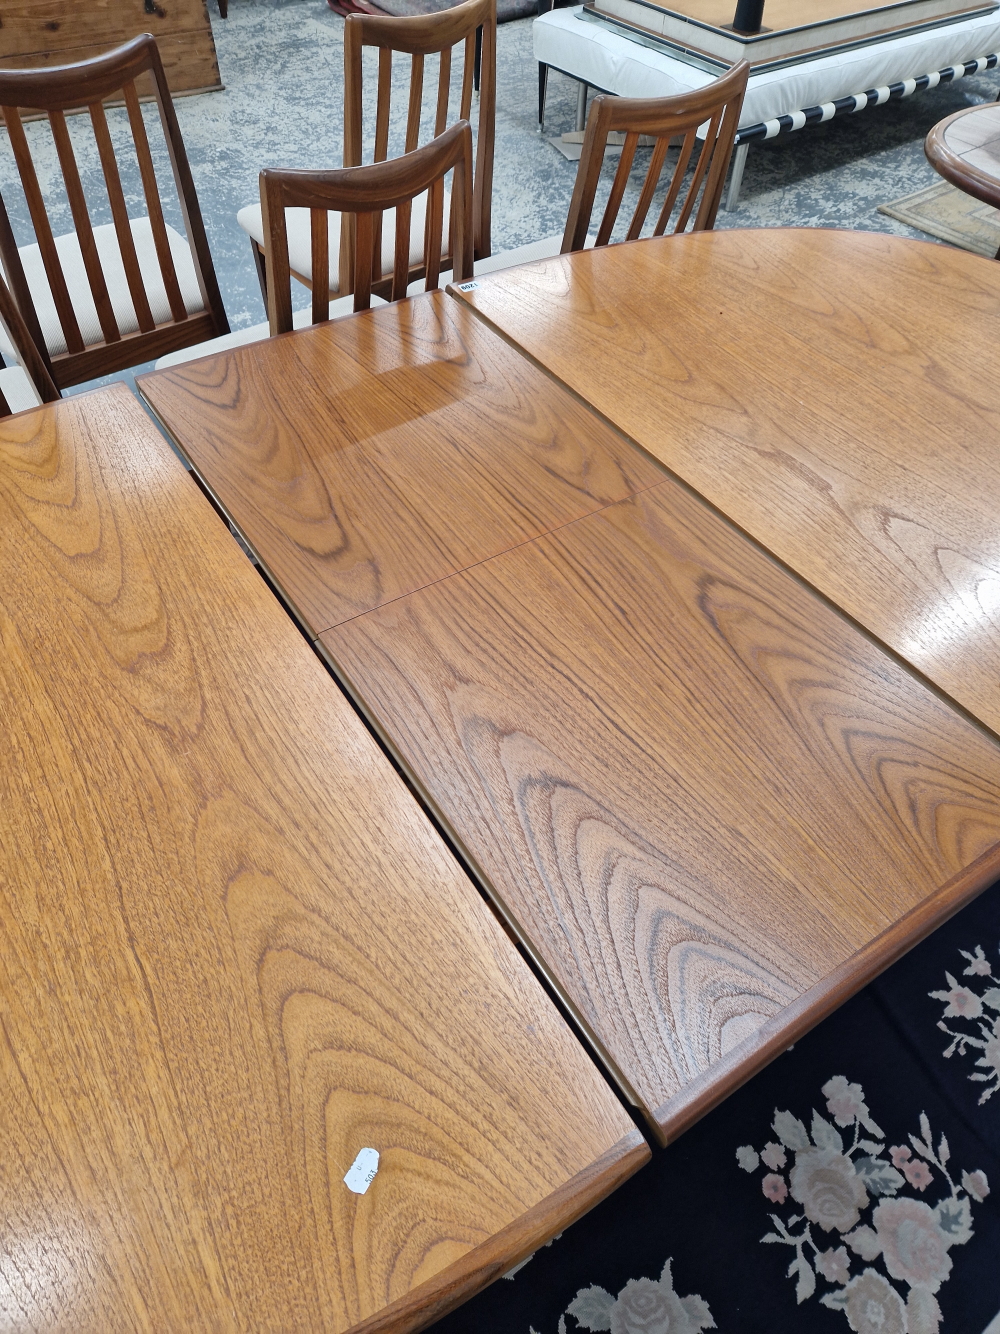 A G- PLAN TEAK EXTENDING DINING TABLE WITH MATCHING HIGH BACK CHAIRS. - Image 8 of 12